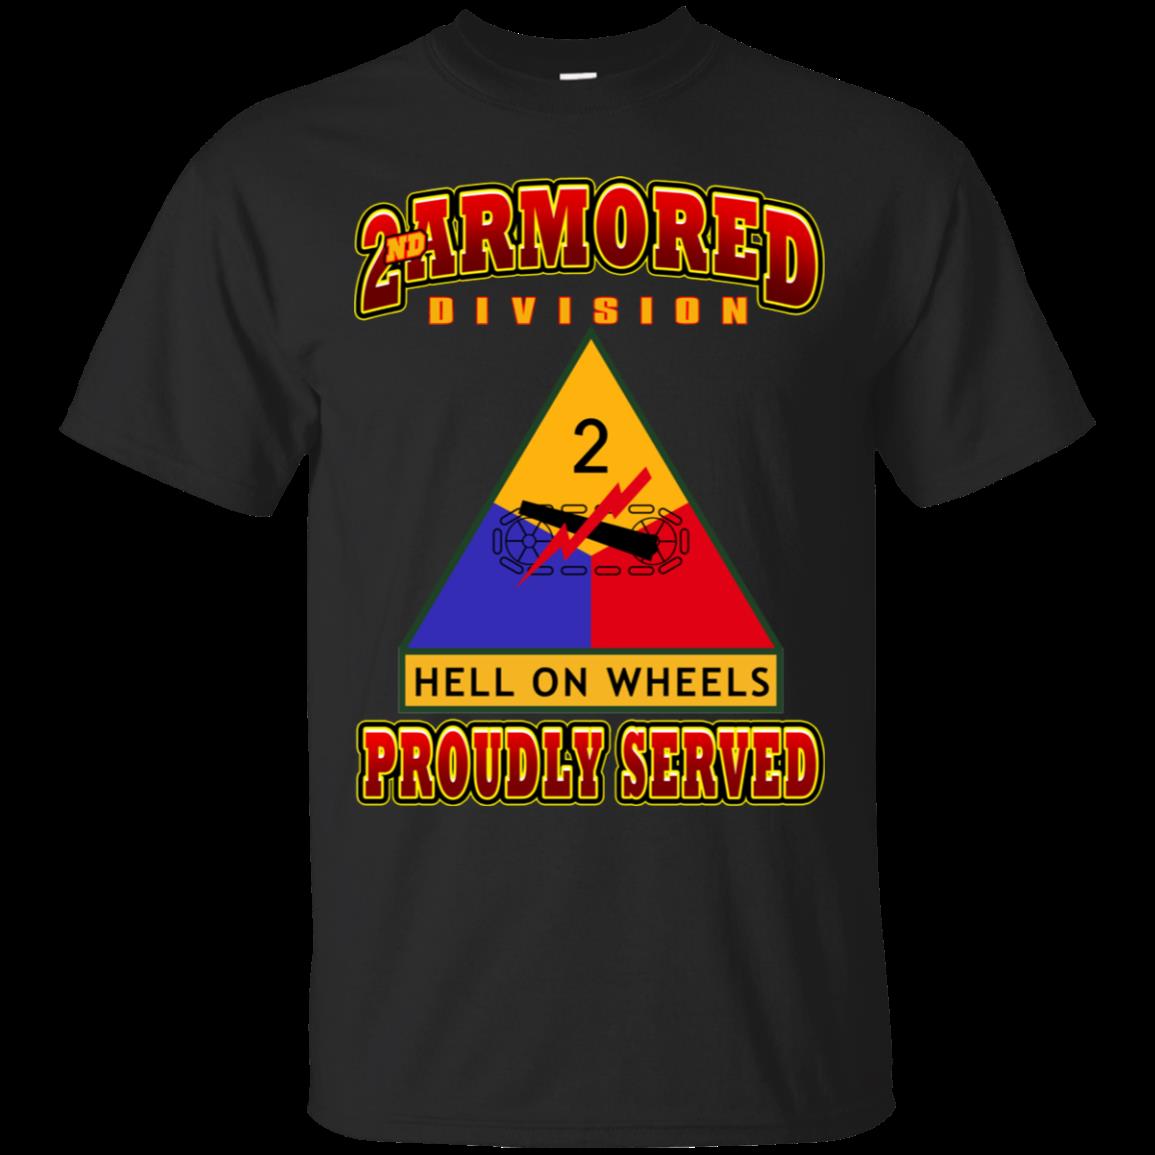 2nd Armored Division Proudly Served